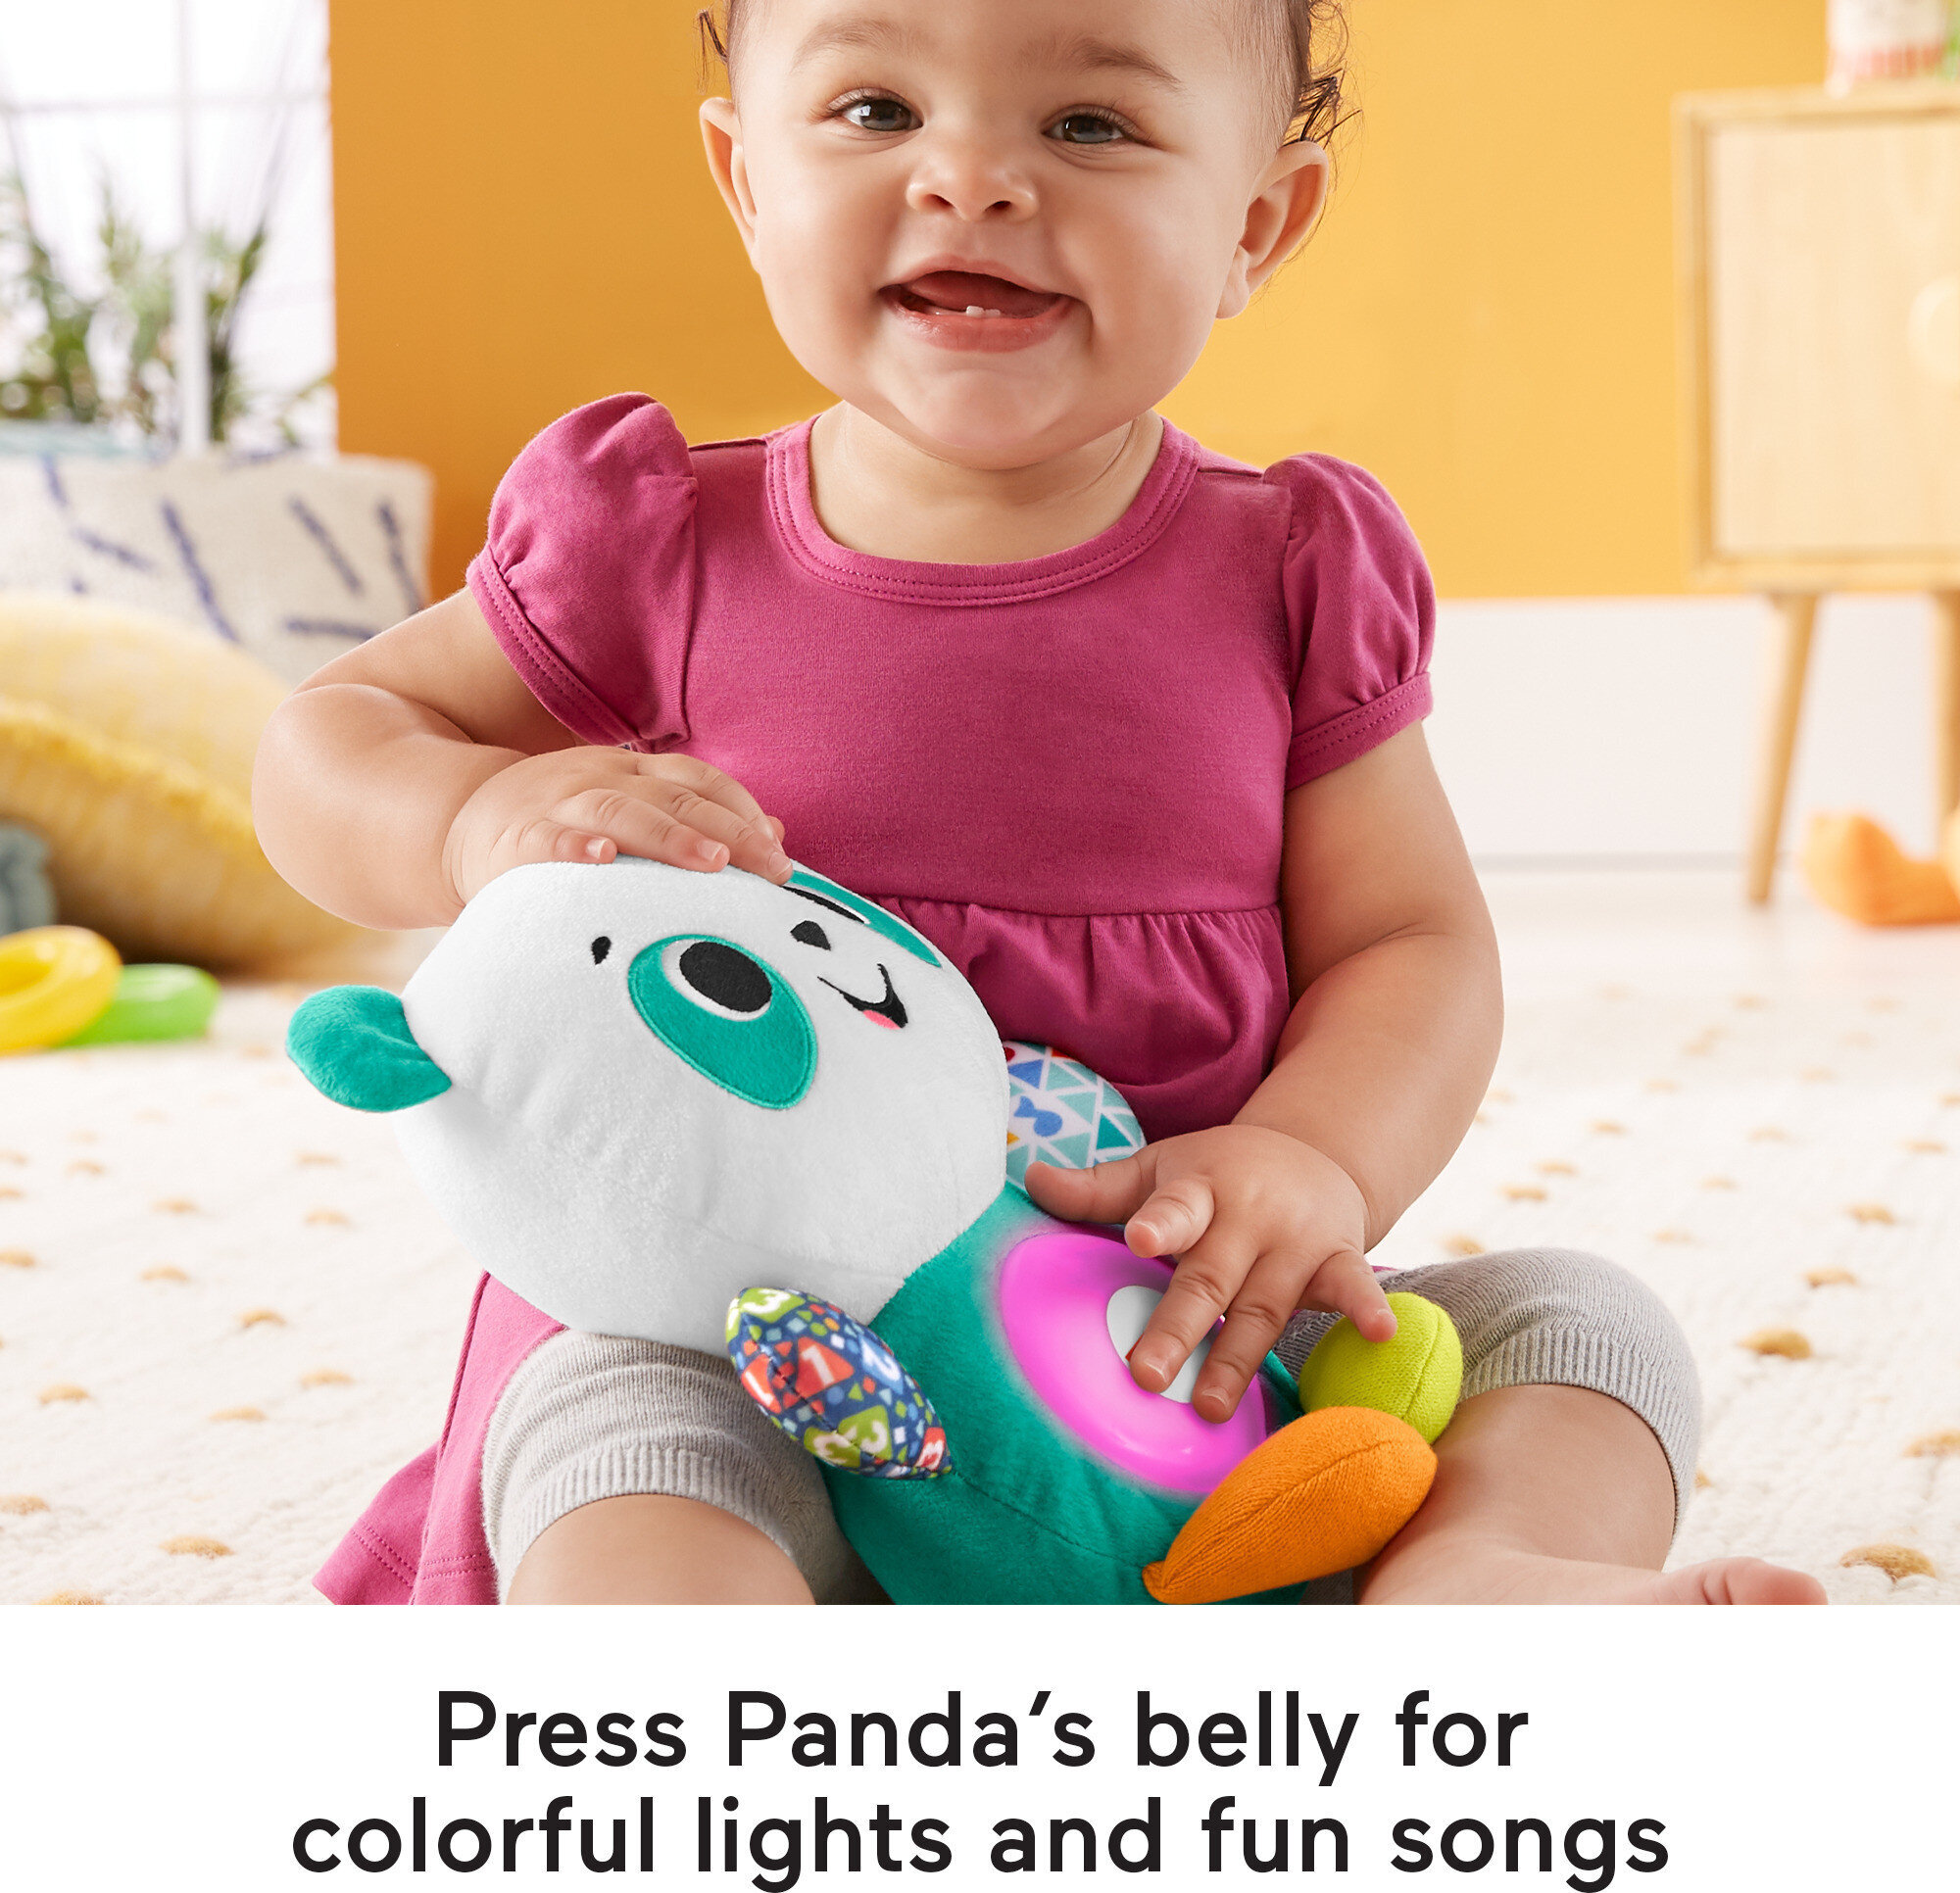 Fisher-Price Linkimals Play Together Panda Interactive Musical Plush Toy for Infant & Toddler - image 4 of 8